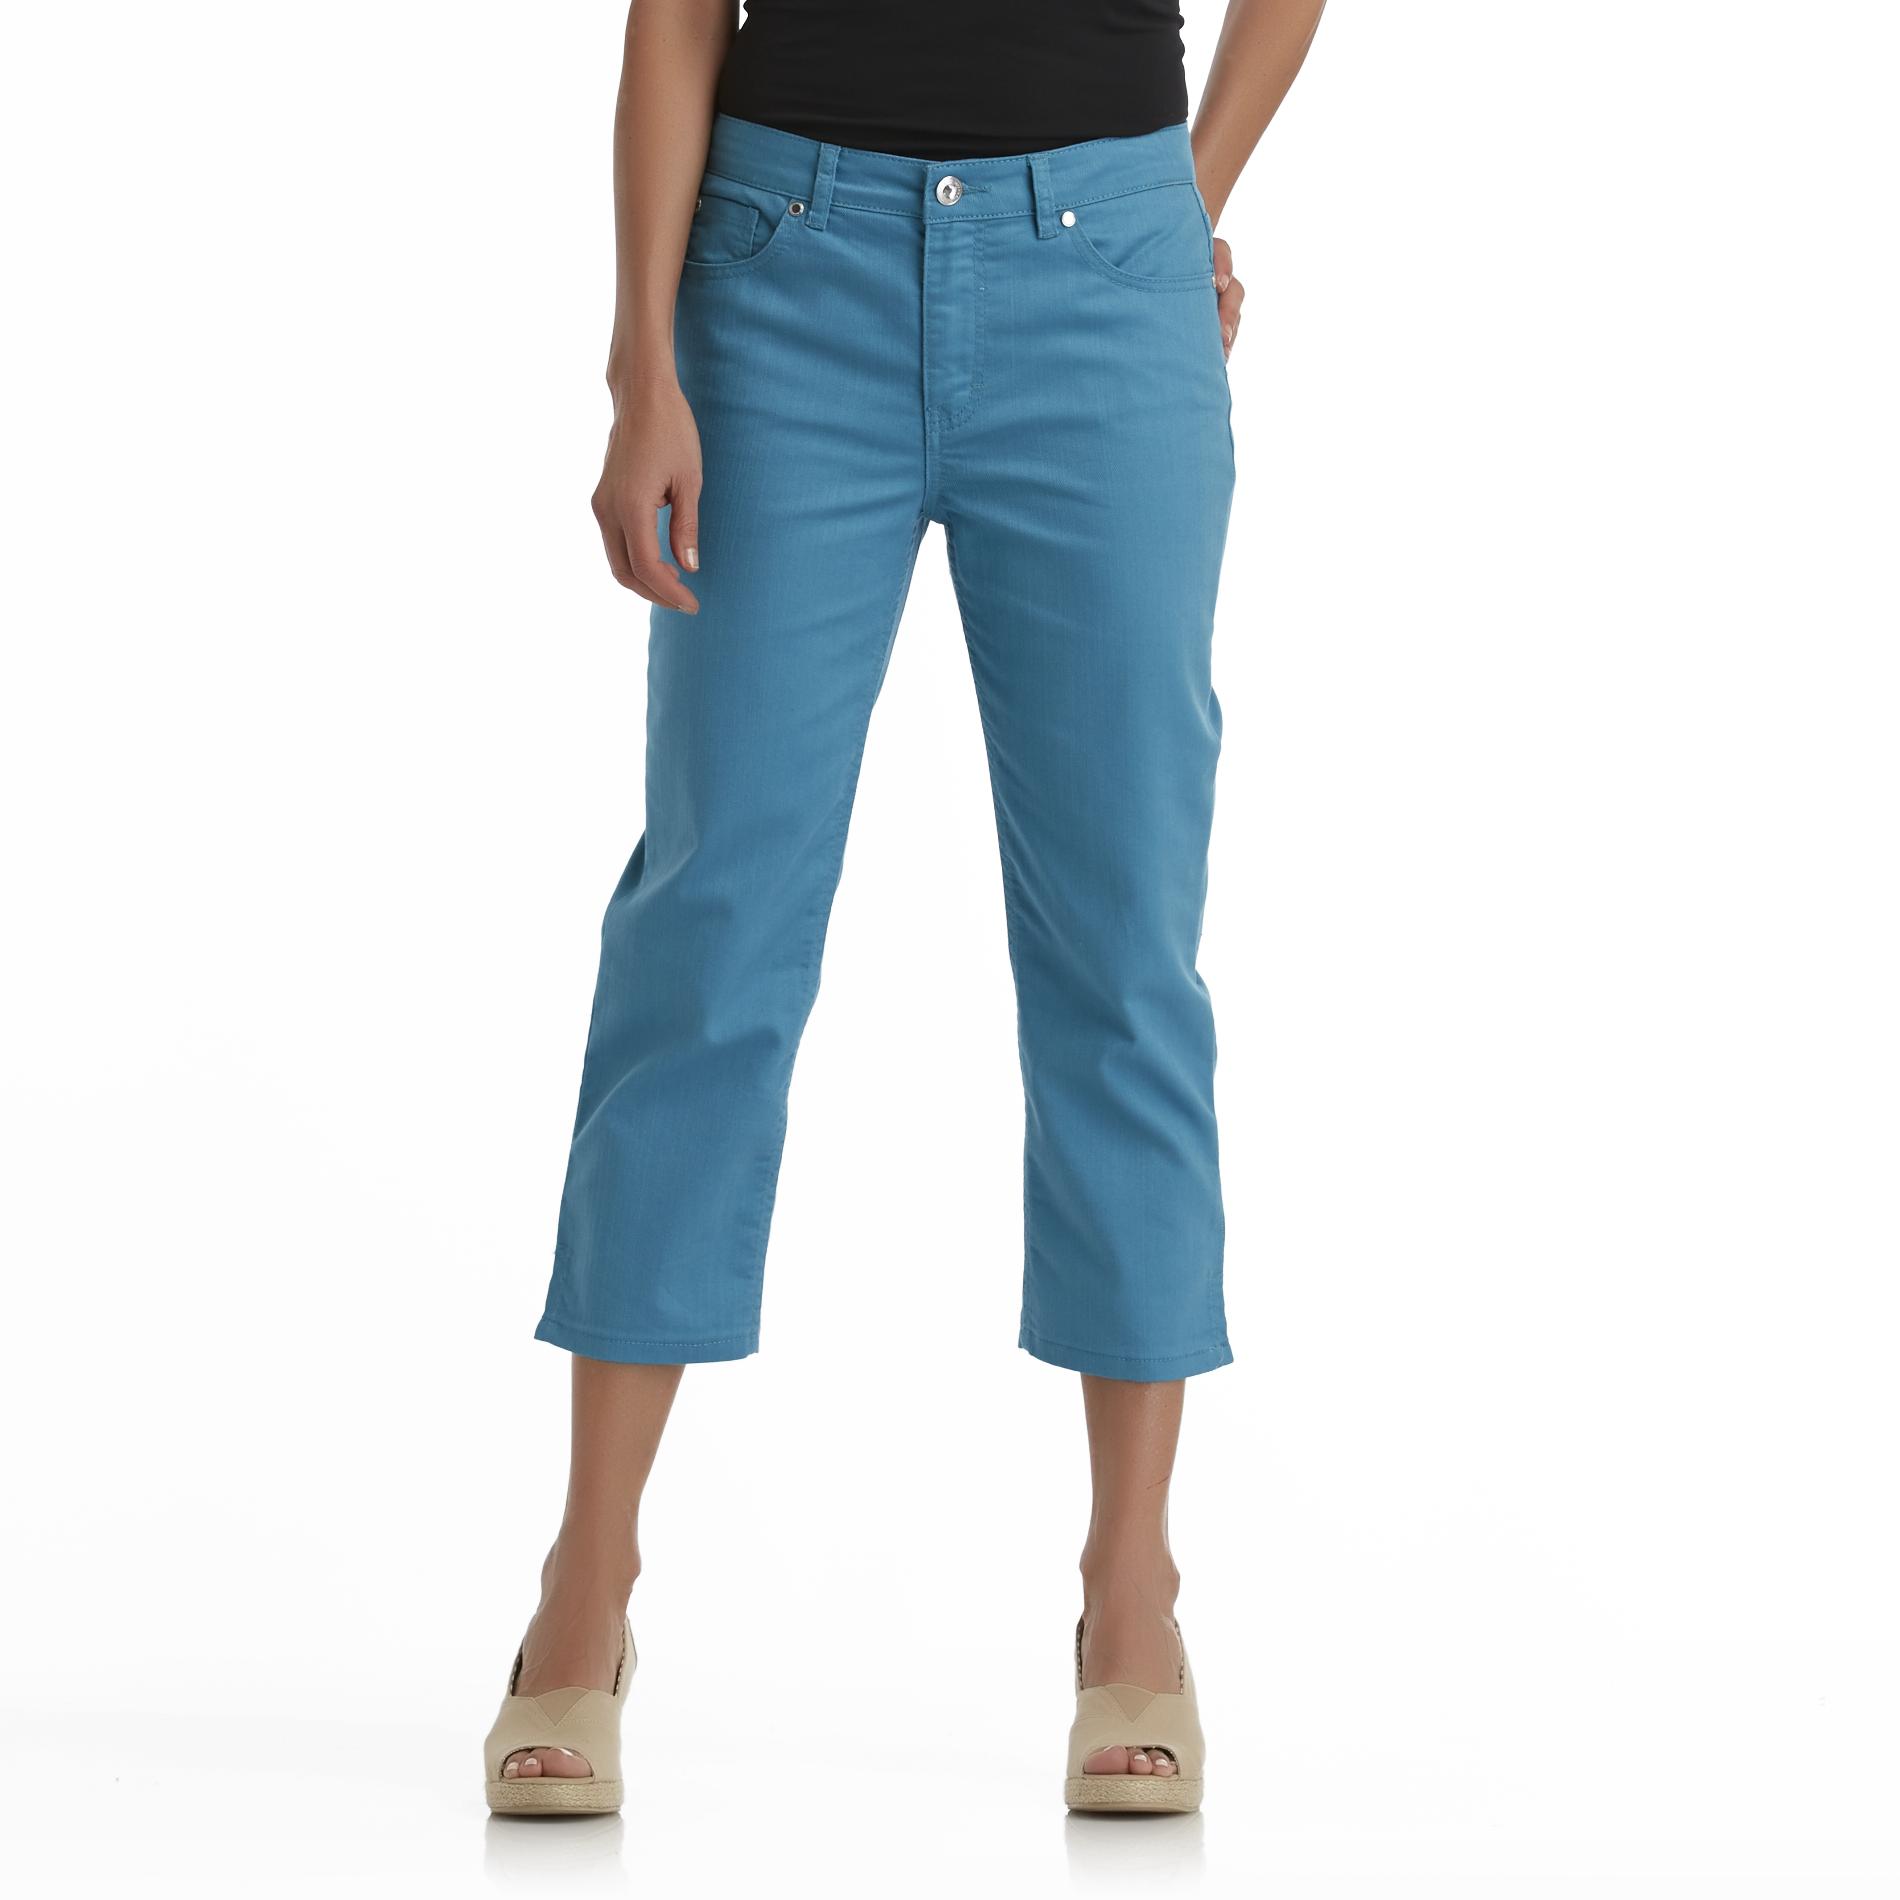 Jaclyn Smith Women's Embellished Colored Denim Jeans